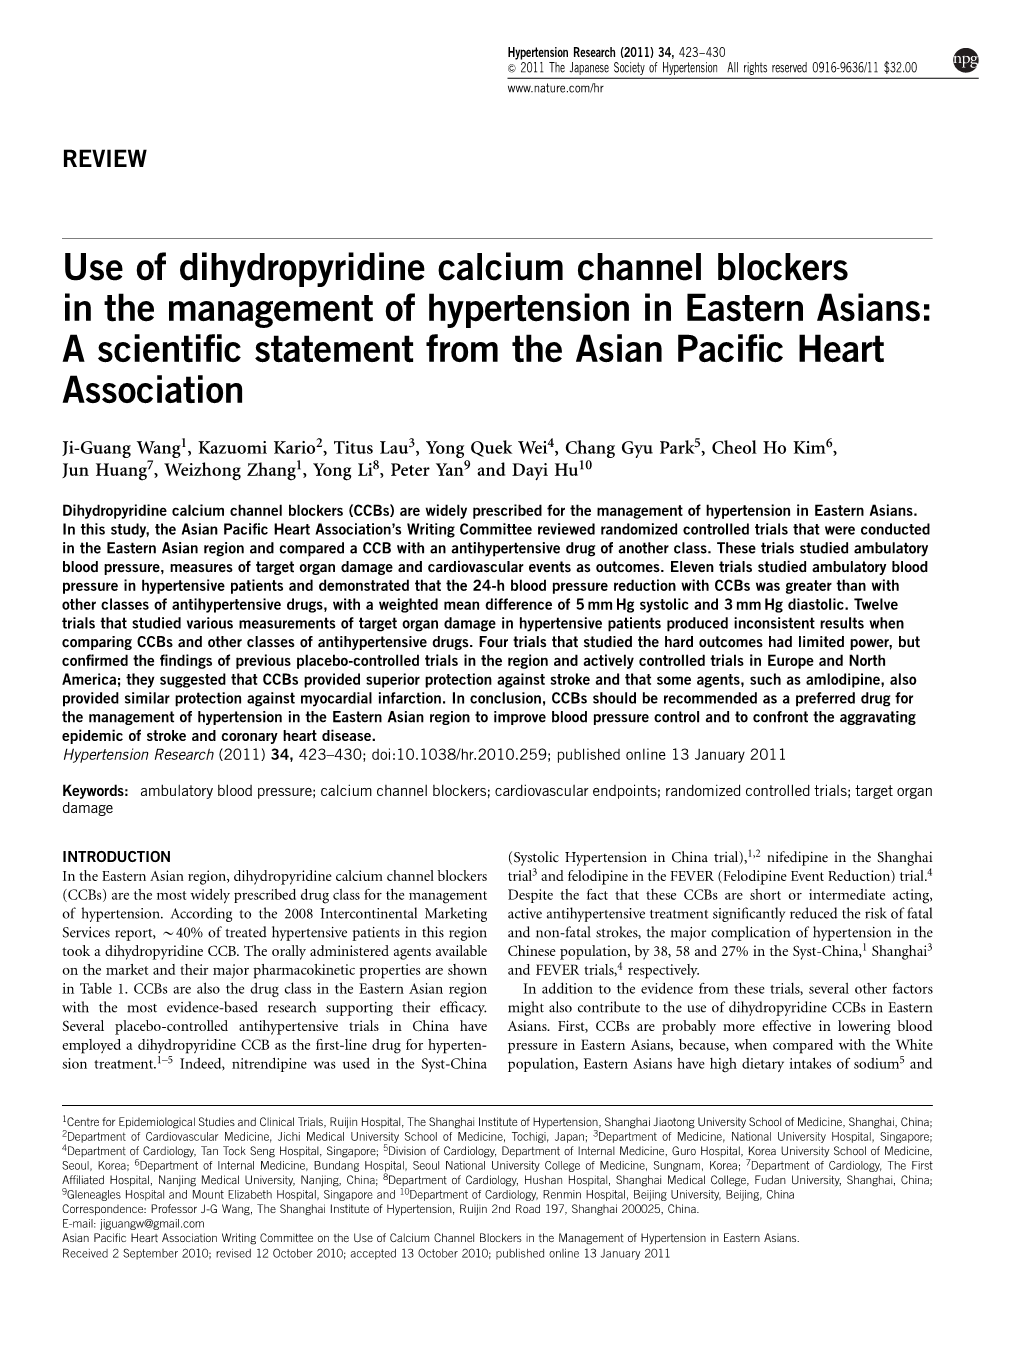 Use of Dihydropyridine Calcium Channel Blockers in the Management of Hypertension in Eastern Asians: a Scientiﬁc Statement from the Asian Paciﬁc Heart Association